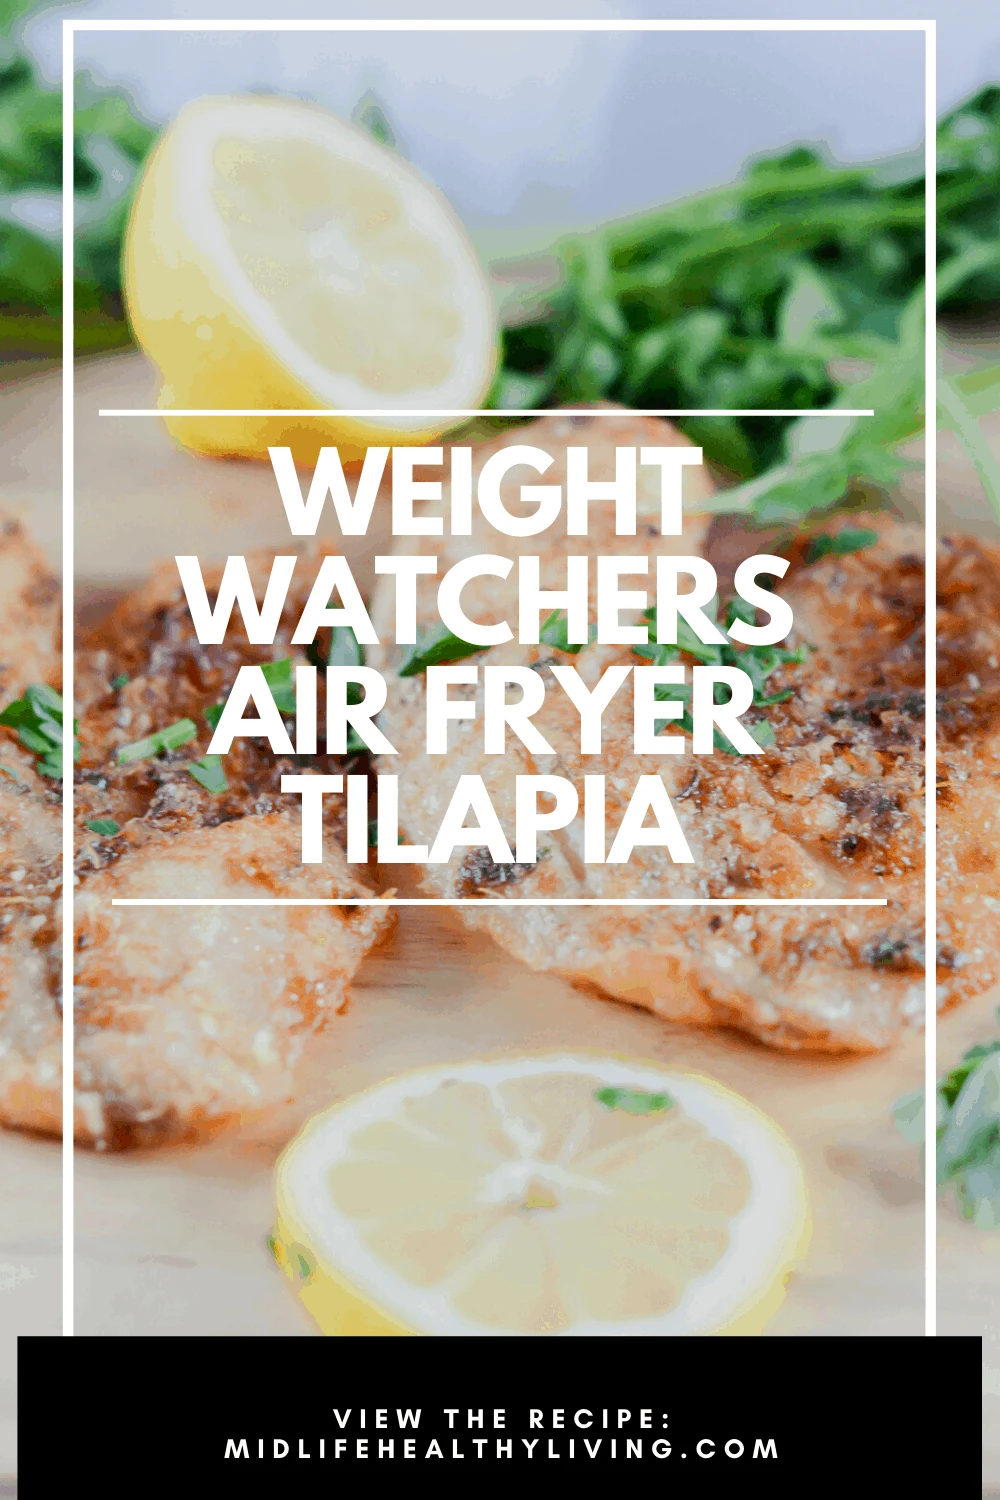 A pin showing the finished weight watchers air fryer tilapia recipe ready to eat with title in the middle.